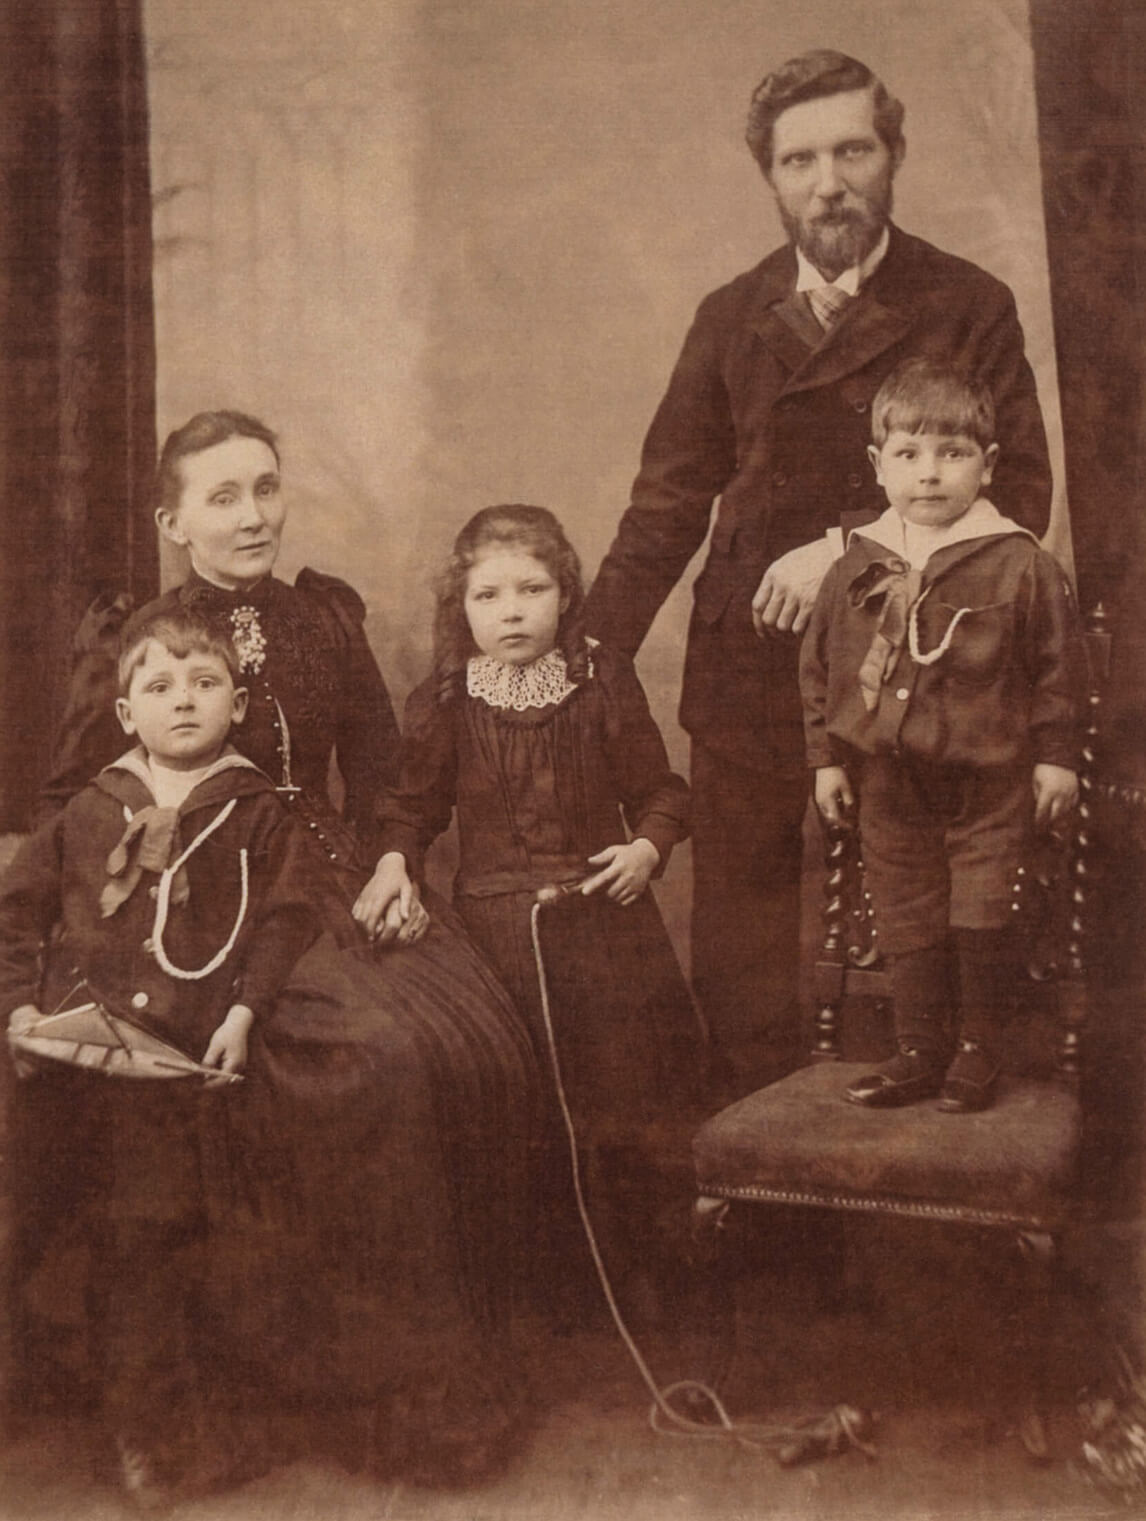 Art Canada Institute, photograph of Bertram Brooker with his parents and younger siblings in England, 1890s.